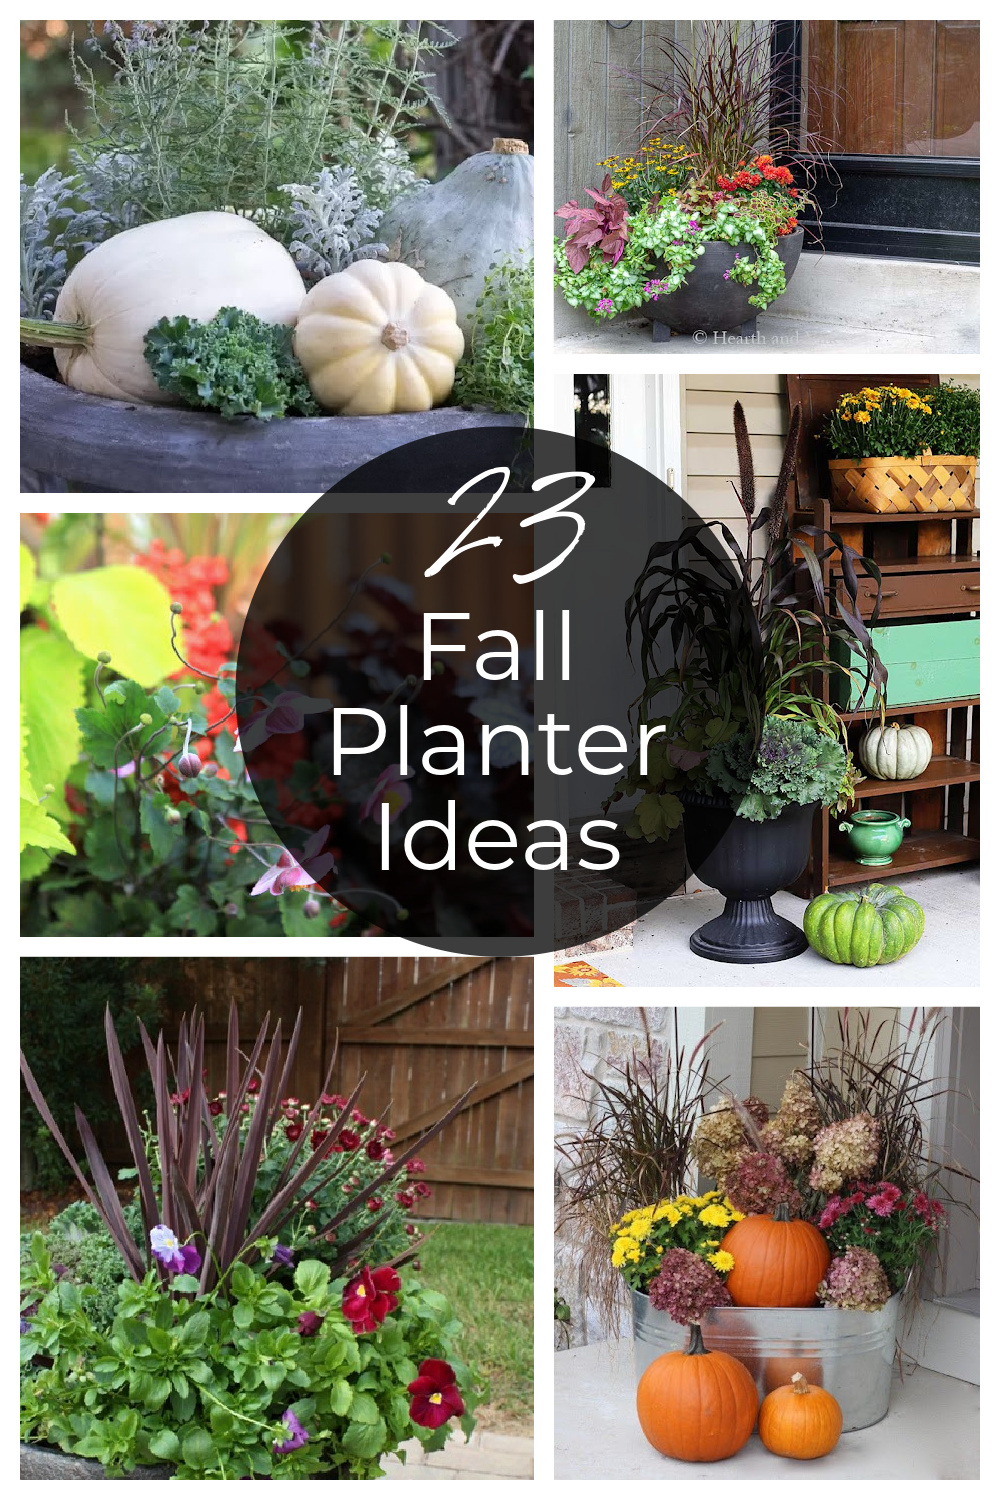 Group of six front porch planters for fall with a text overlay saying 23 fall planter ideas.